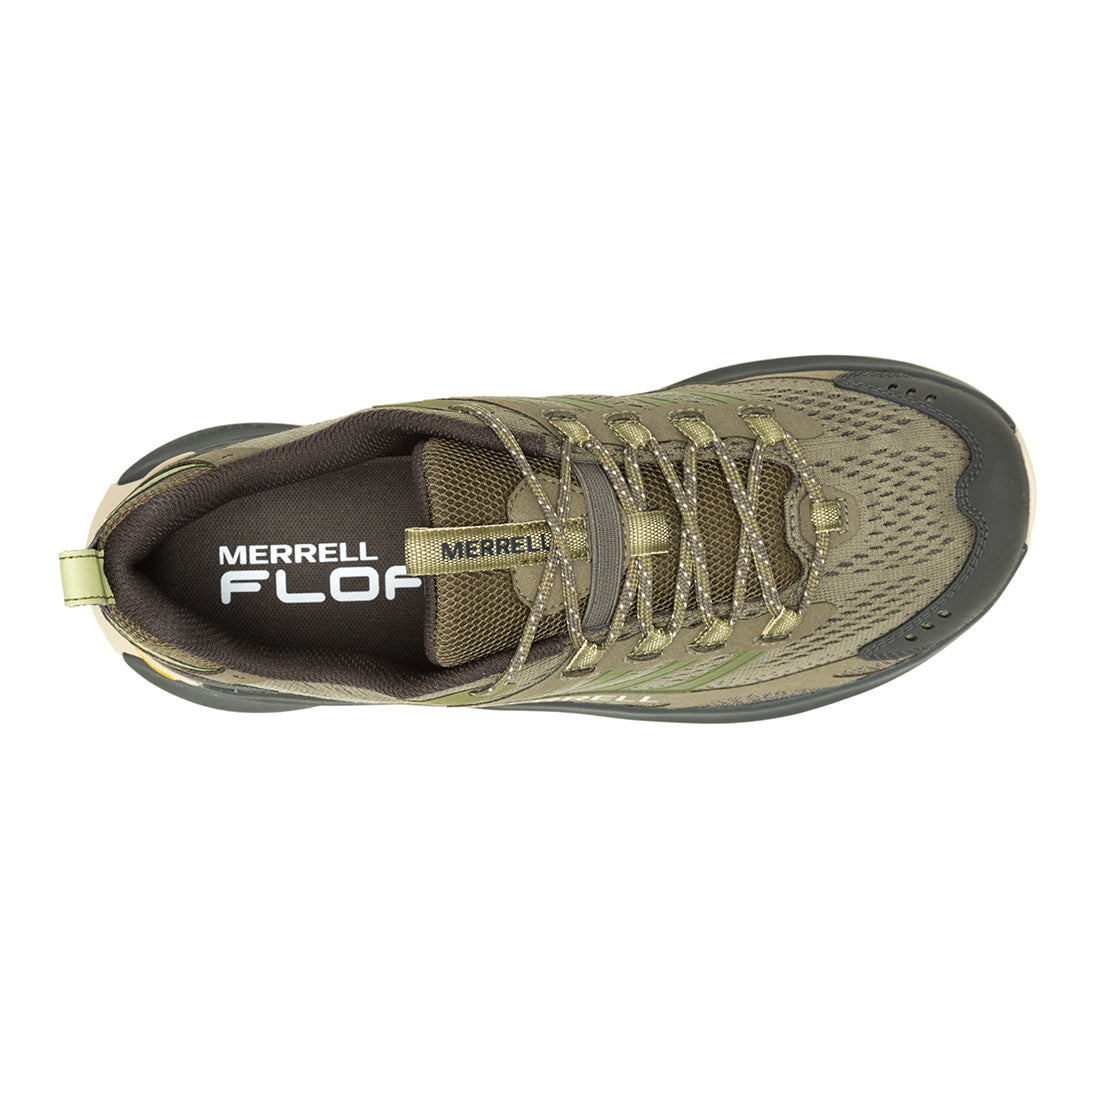 Moab Speed 2 – Olive Mens Hiking Shoes